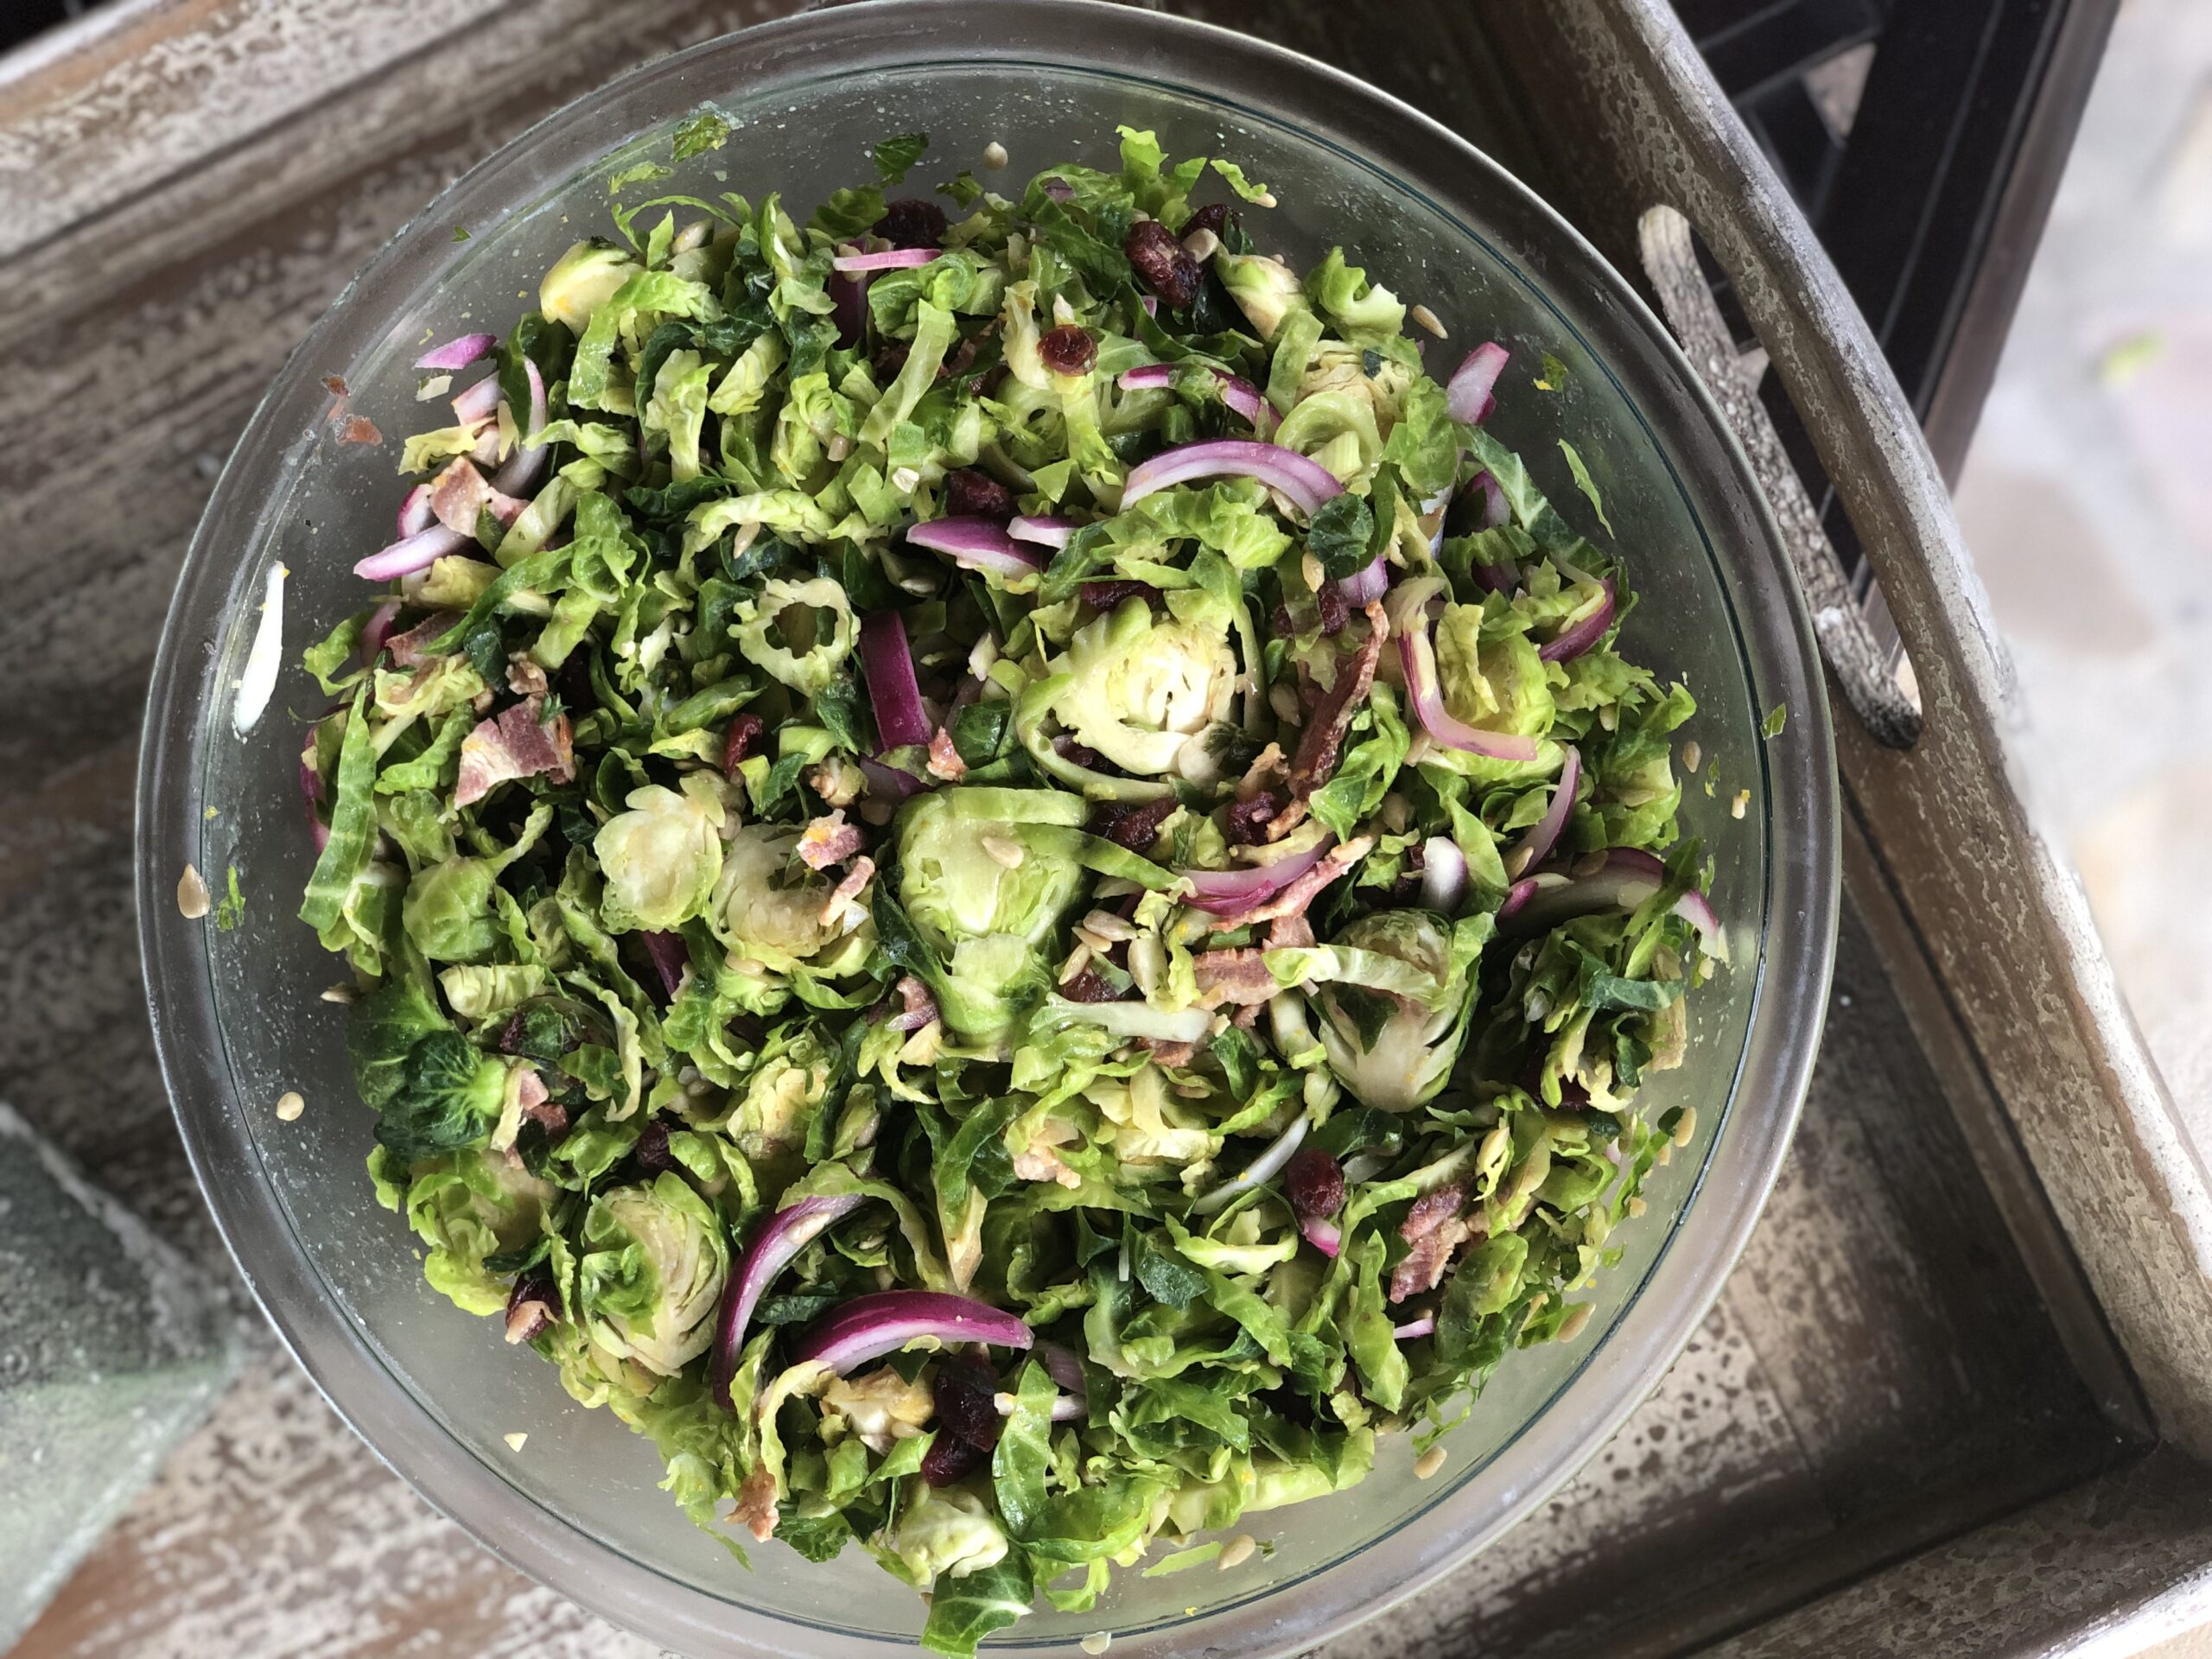 Image of a whole foods based salad with greens